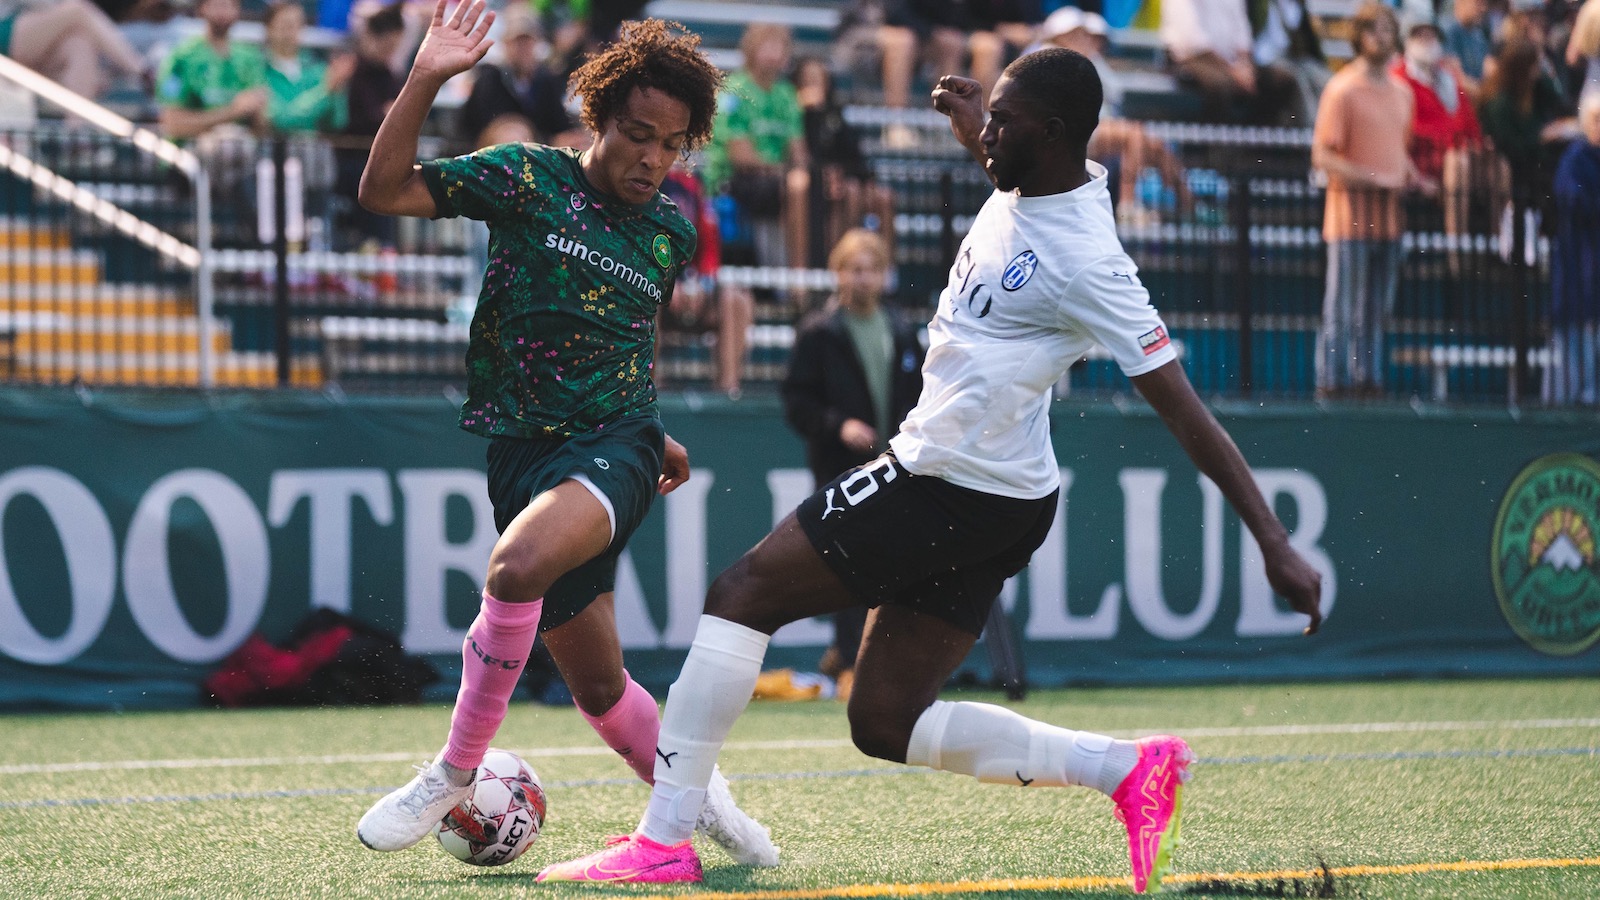 A player in a green Vermont Green FC soccer jersey, kicks the ball around an opposing player in a white jersey as fans look on from the stands behind them.